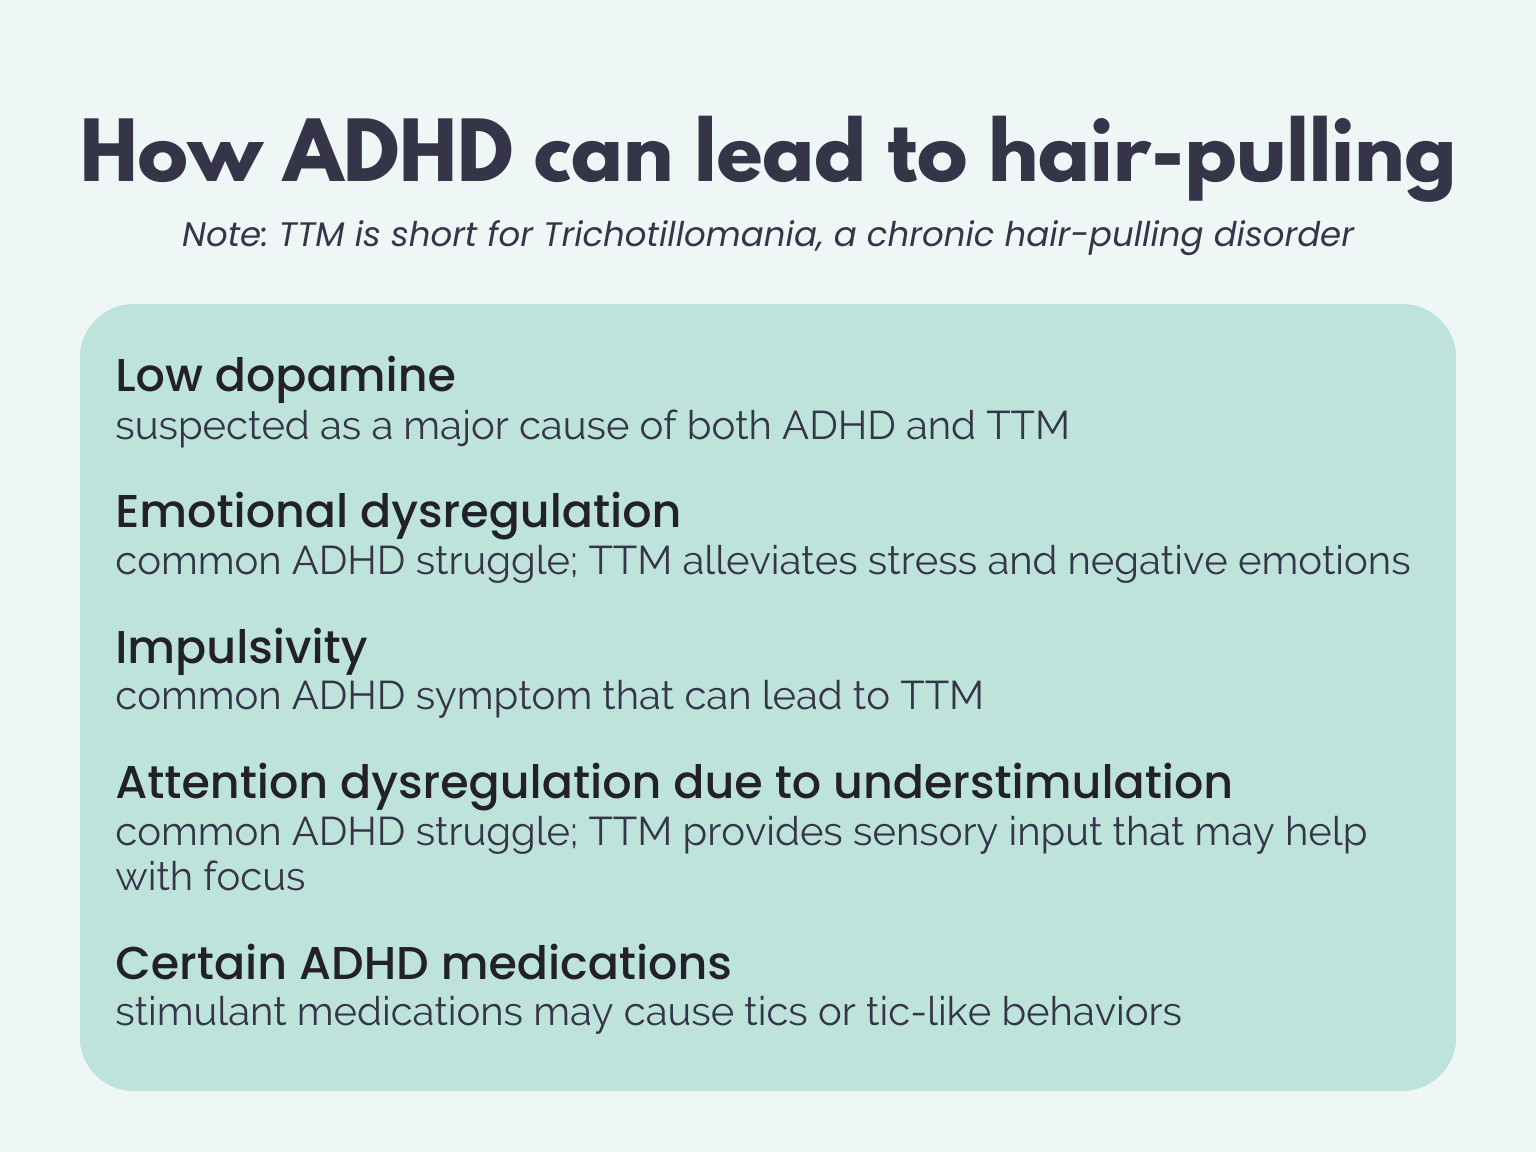 ALT: How ADHD can lead to hair-pulling. Note: TTM is short for Trichotillomania, a chronic hair-pulling disorder. 1. Low dopamine. suspected as a major cause of both ADHD and TTM. 2. Emotional dysregulation. common ADHD struggle; TTM alleviates stress and negative emotions. 3. Impulsivity. common ADHD symptom that can lead to TTM. 4. Attention dysregulation due to understimulation. common ADHD struggle; TTM provides sensory input that may help with focus. 5. Certain ADHD medications. stimulant medications may cause tics or tic-like behaviors.